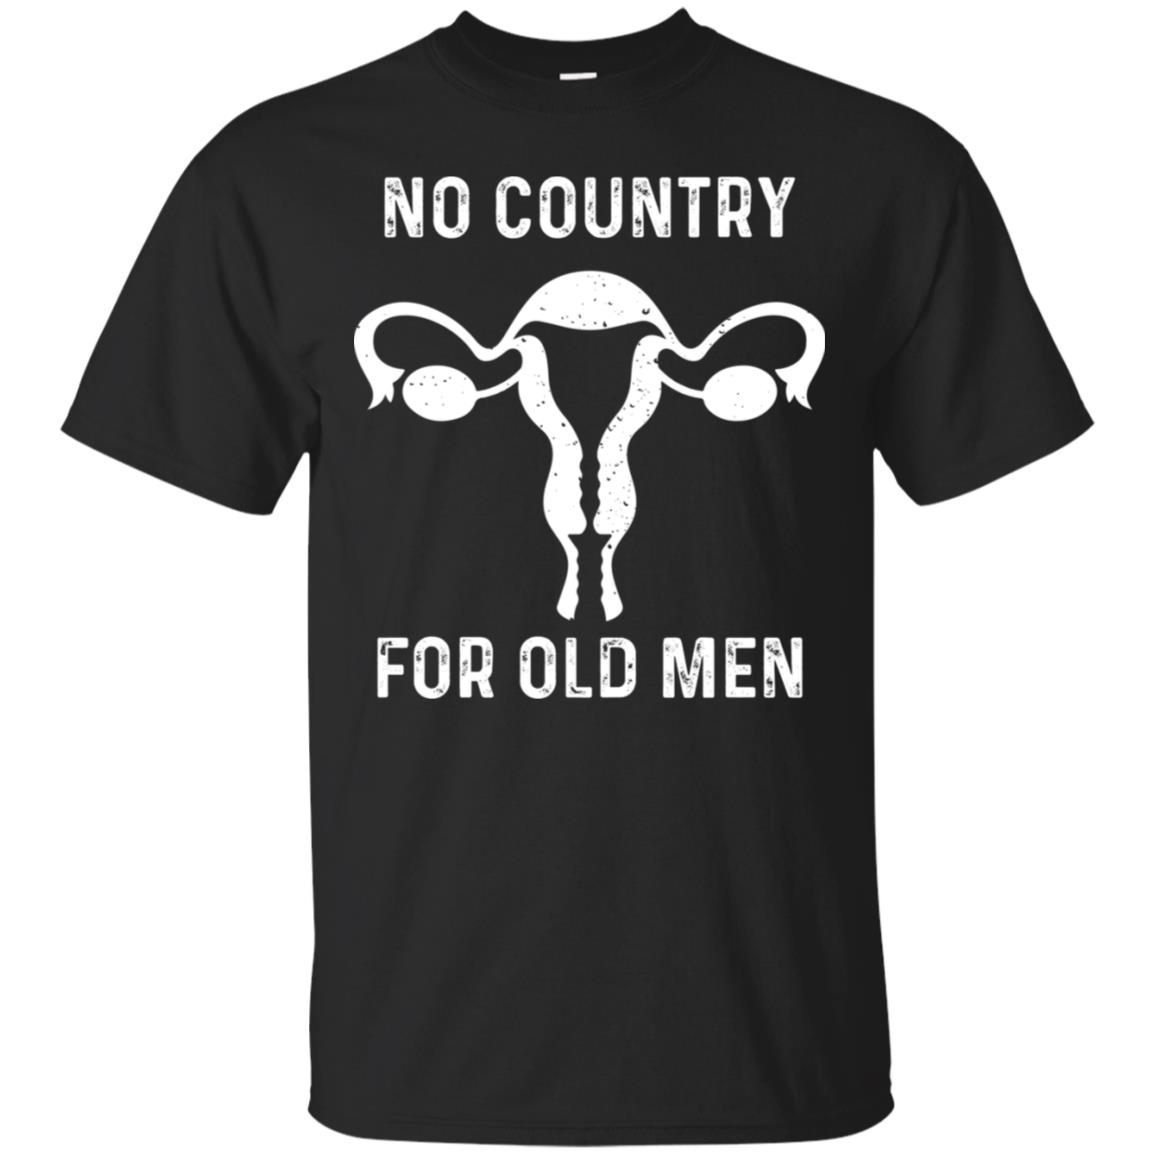 No country for old men T shirt, Ls, Hoodie - RobinPlaceFabrics